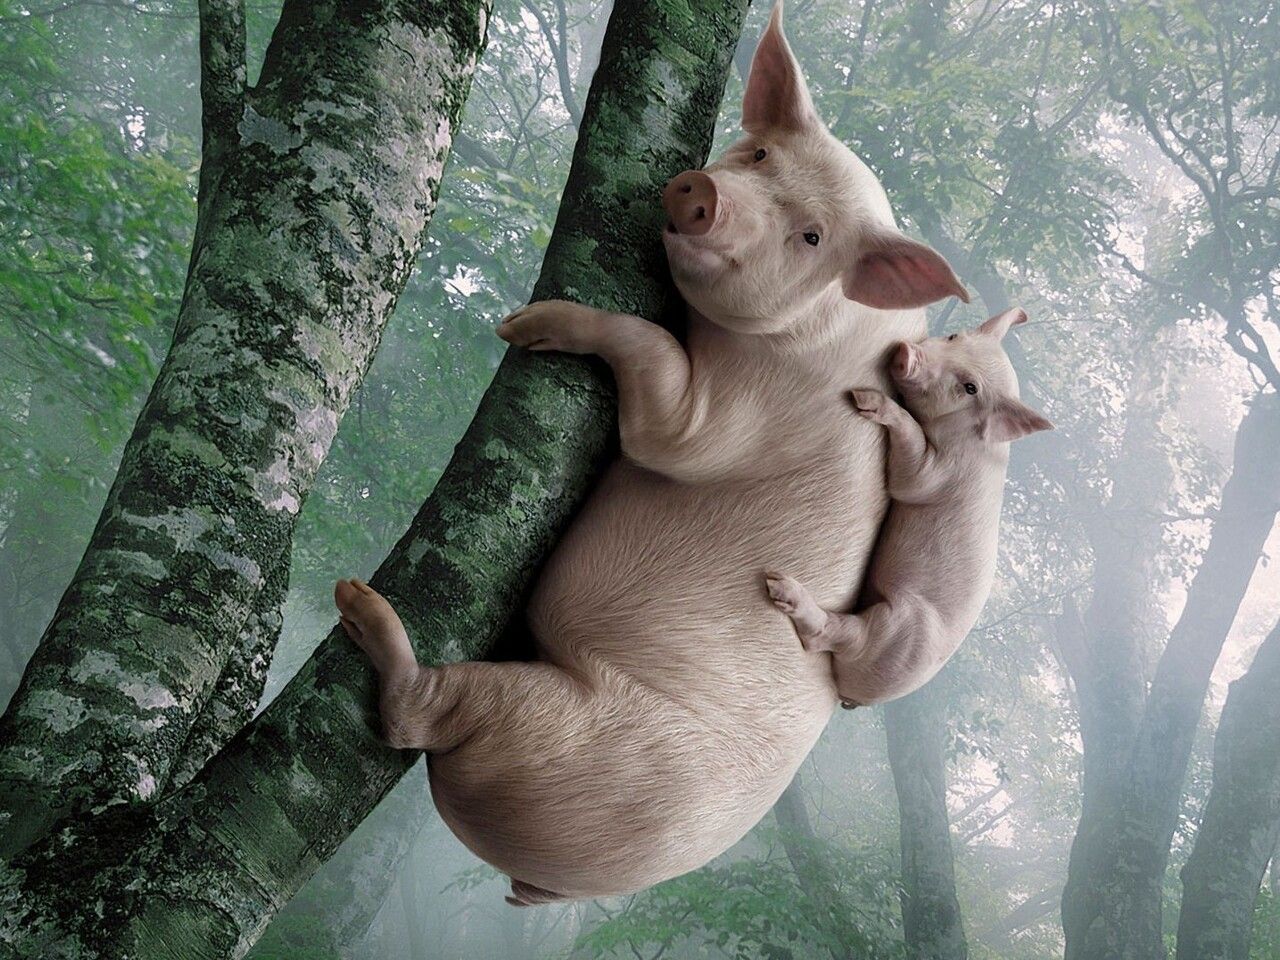 Big and small pigs in the tree wallpaper Wallpaper Download 1280x960